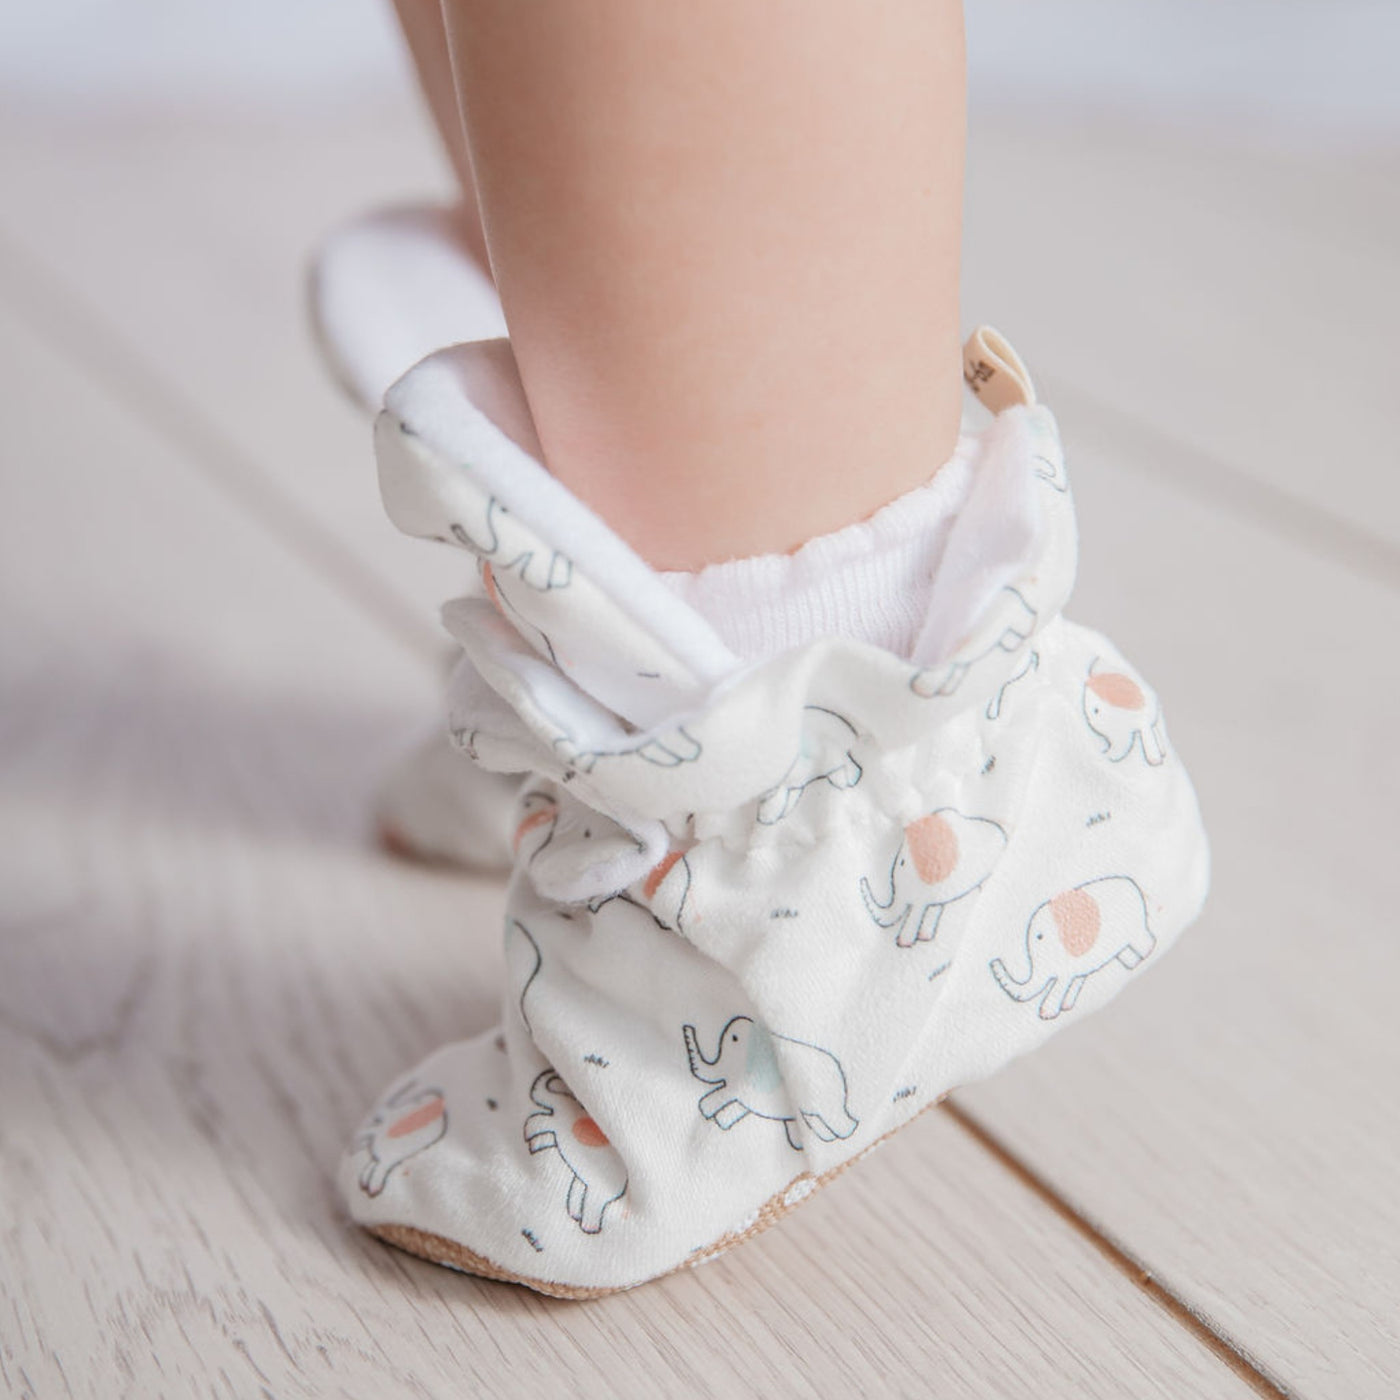 Baby girl on tip toes wearing a pair of stay-on baby booties featuring an elephant print on white cotton fabric, with non-slip soles and adjustable three snap closure. Made from organic cotton.